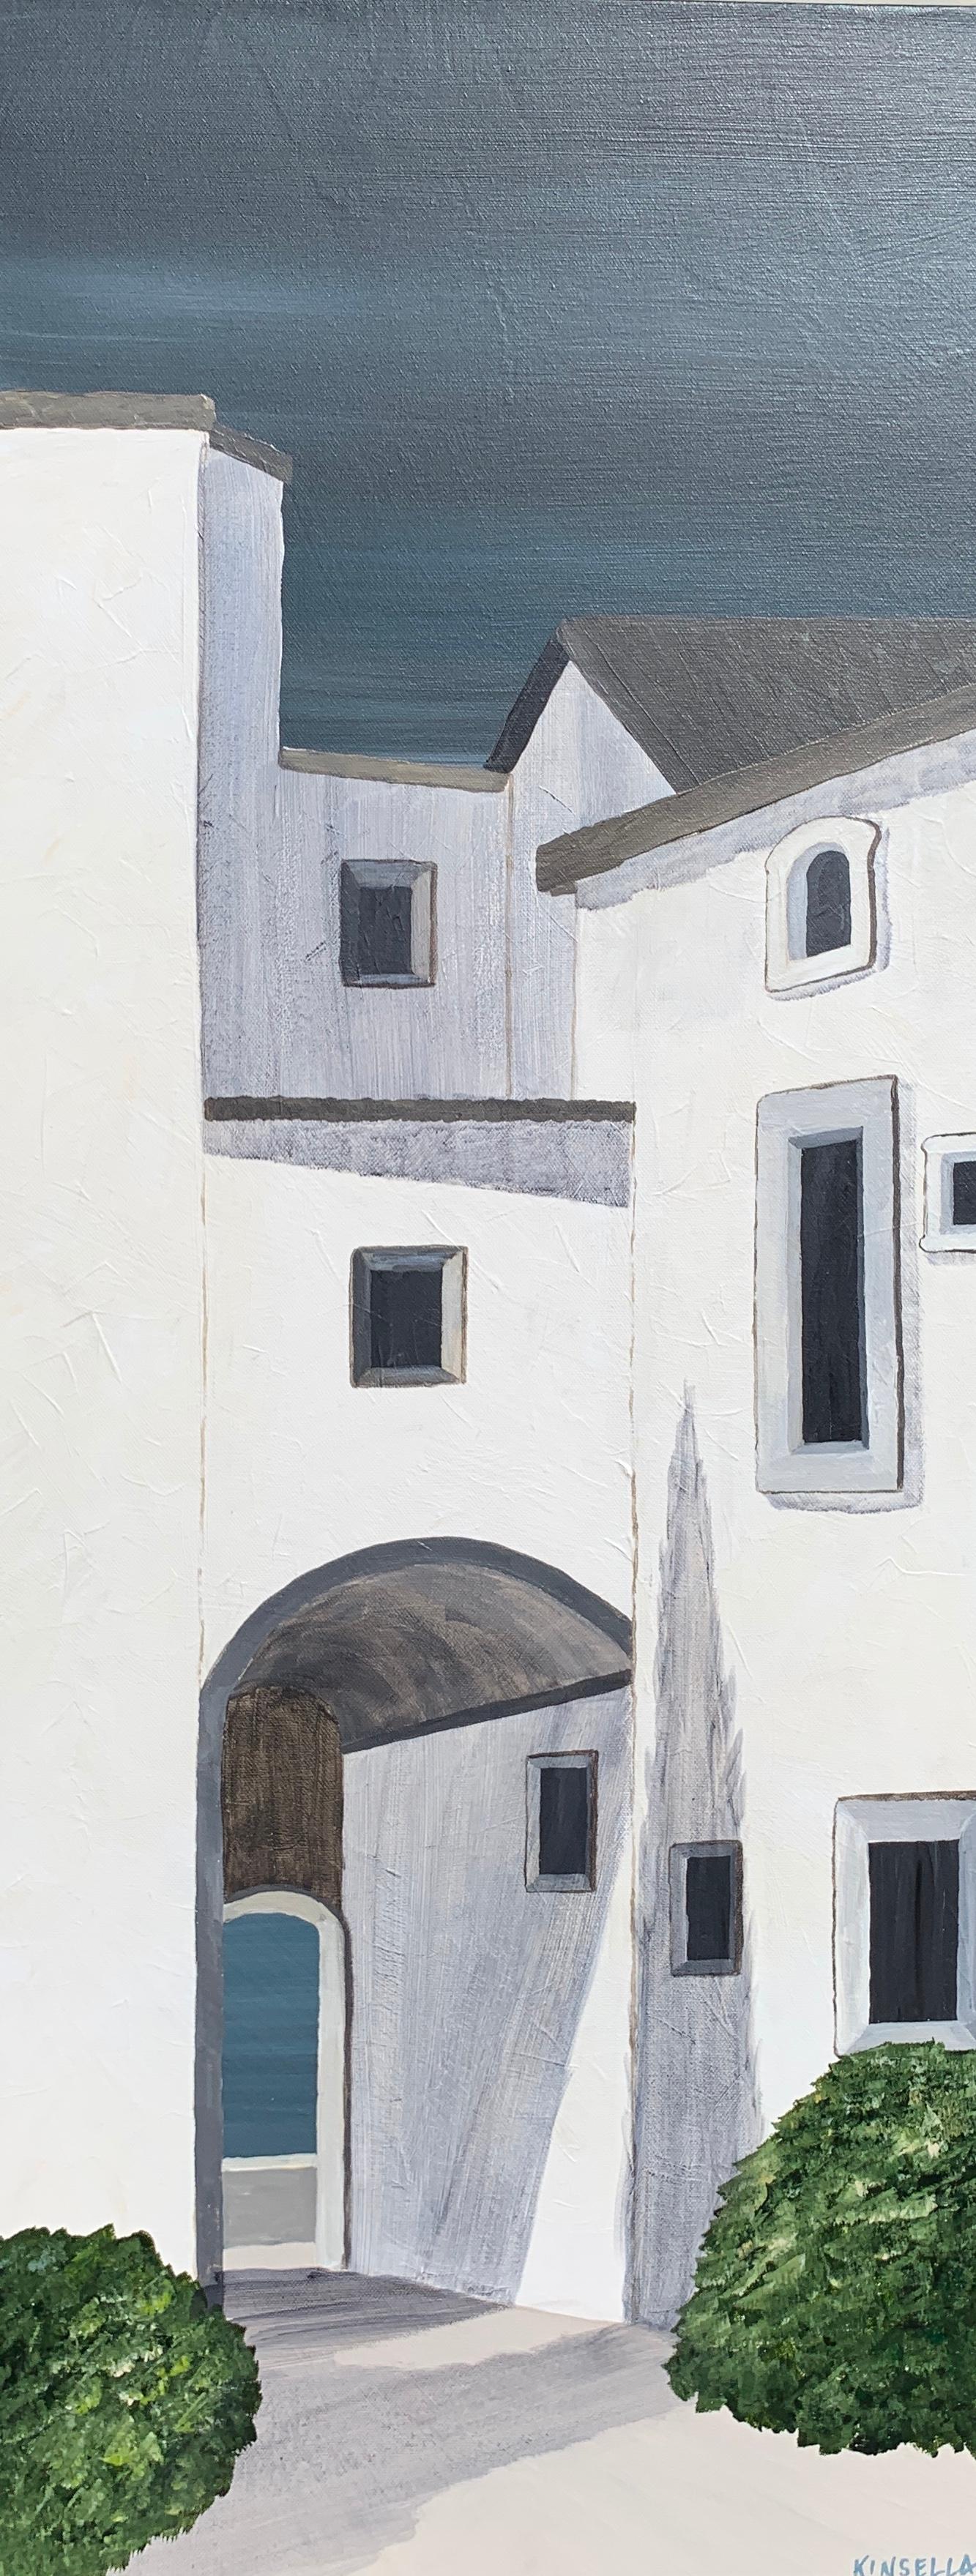 'L'Après Midi' is a slender contemporary acrylic on canvas painting created by American artist Susan Kinsella in 2019. Featuring a palette made of dark blue grey, off-white and green, the painting depicts a close view of a house, crossed by an